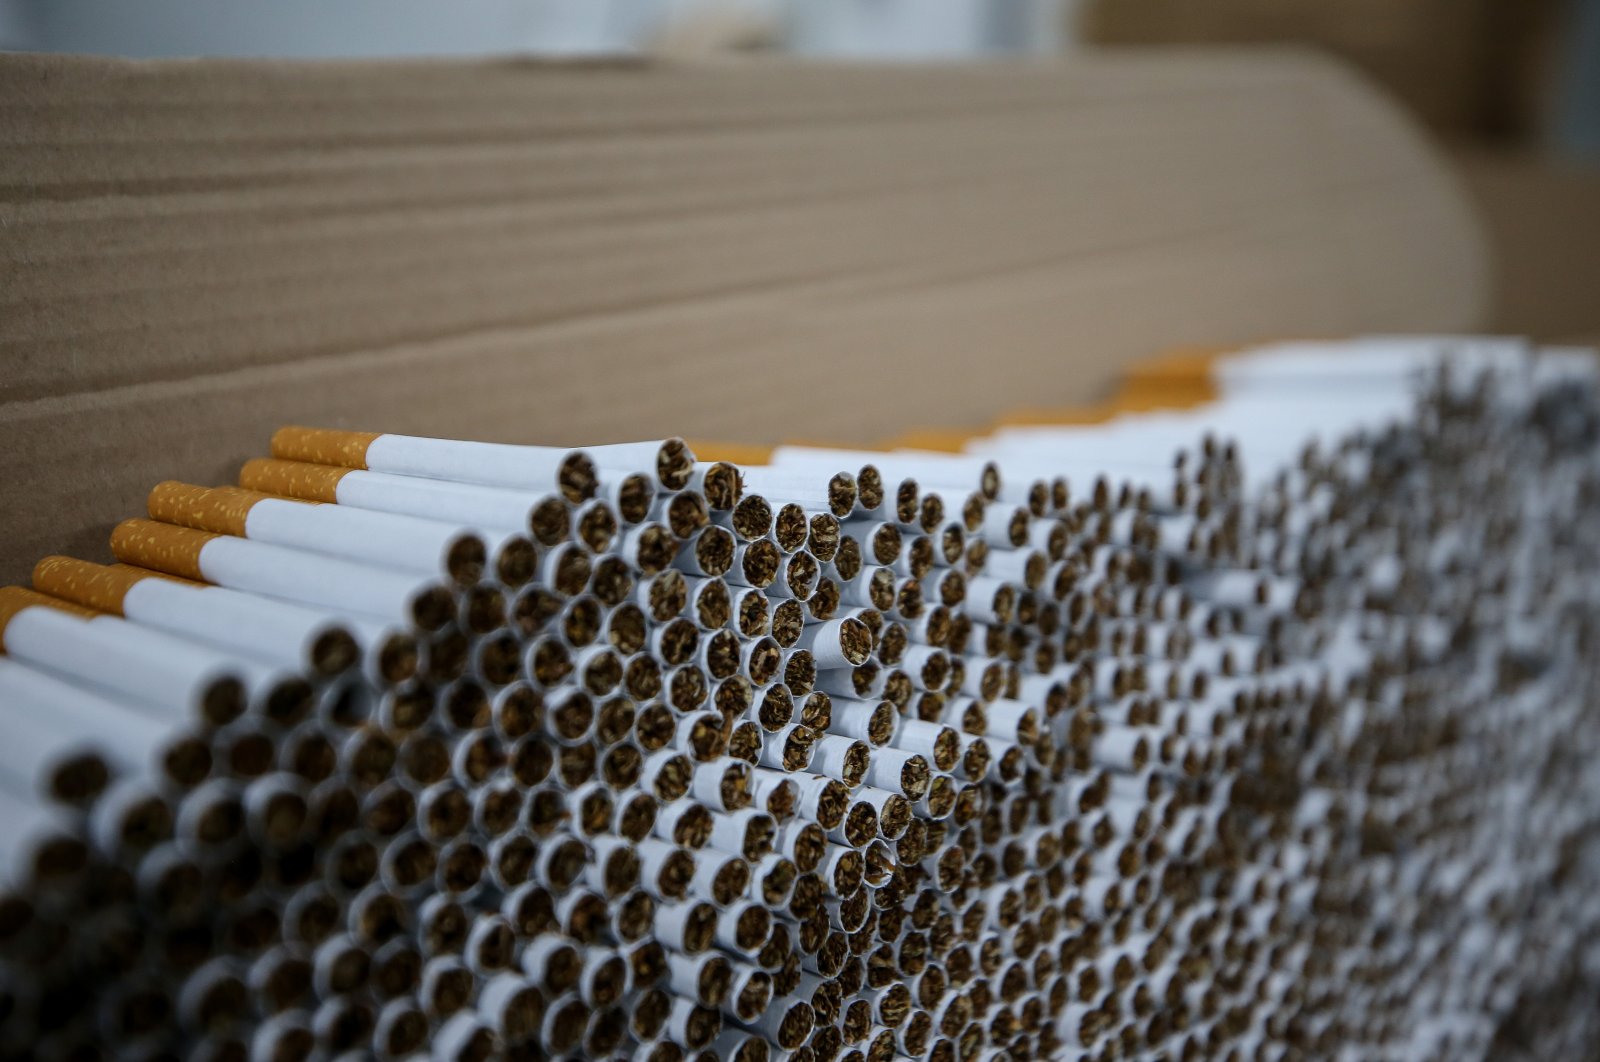 A view of the cigarettes seized in the raid, in Bursa, northwestern Turkey, May 22, 2022. (AA Photo)